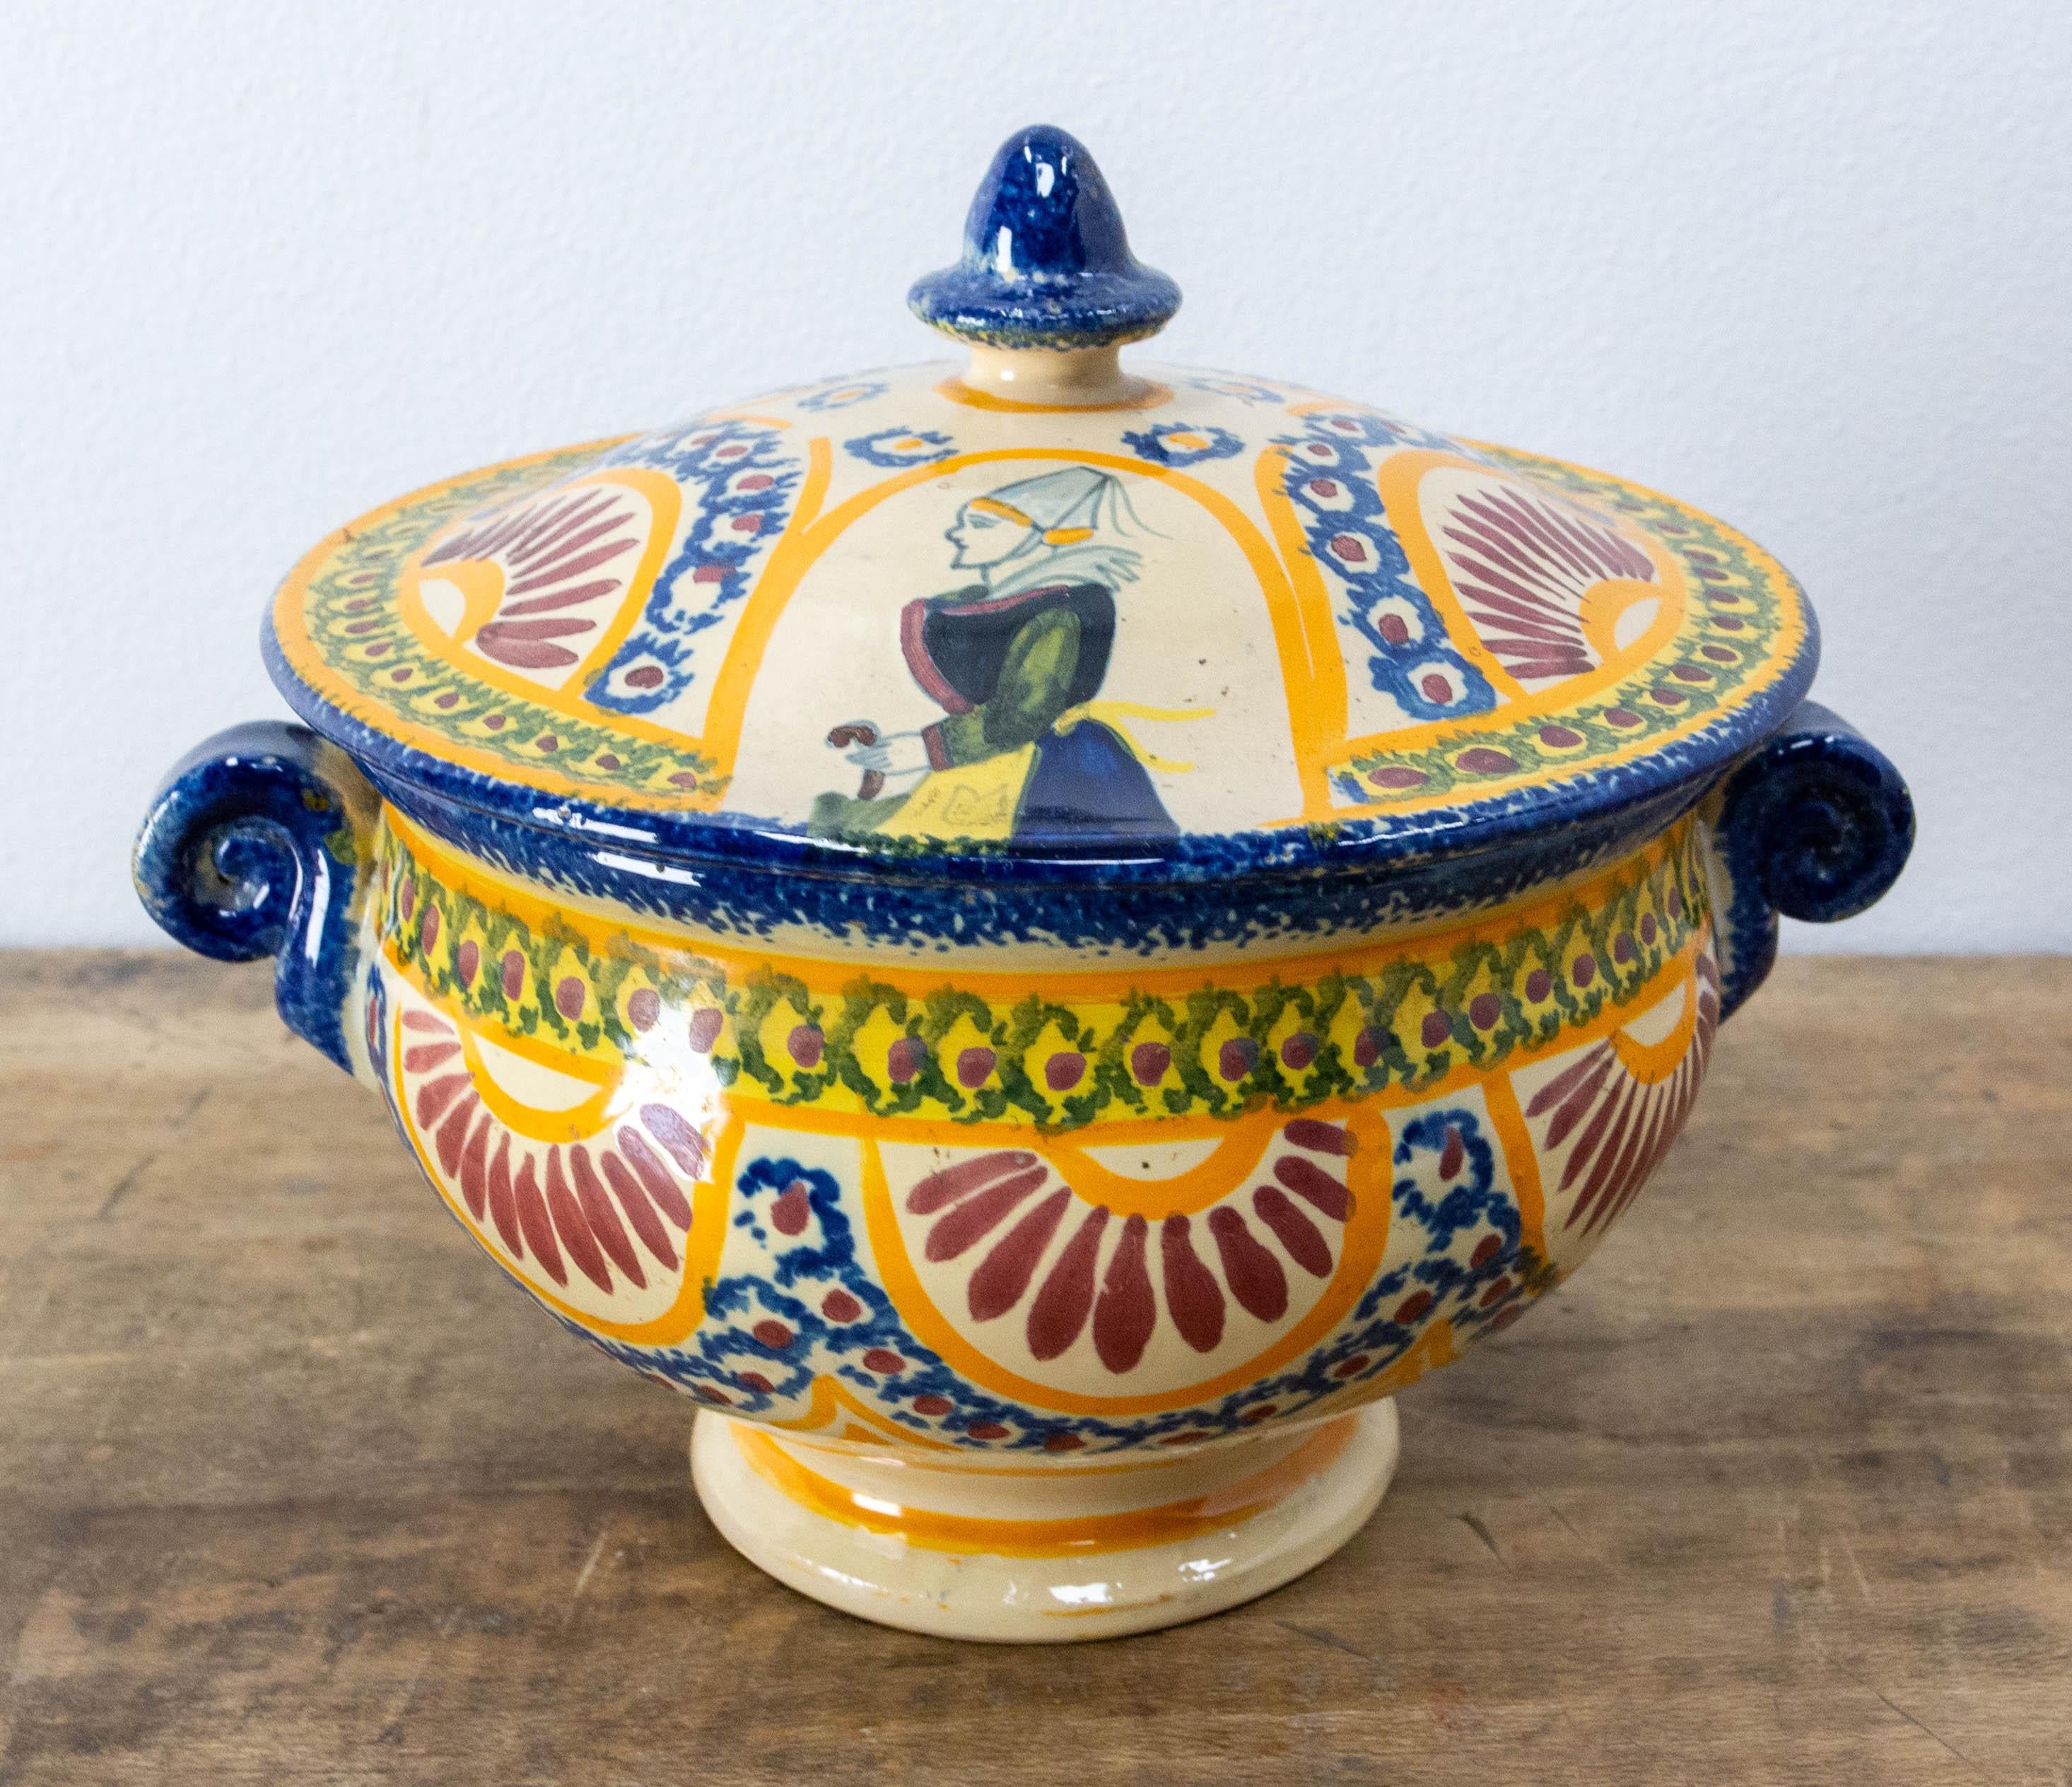 French little tureen from Henriot manufactory in Quimper, Britanny.
The porcelain manufactories exist in Quimper since the 18th century.
Decorated with patterns typical of Britanny, this centerpiece or vide poche is décorated with a woman in